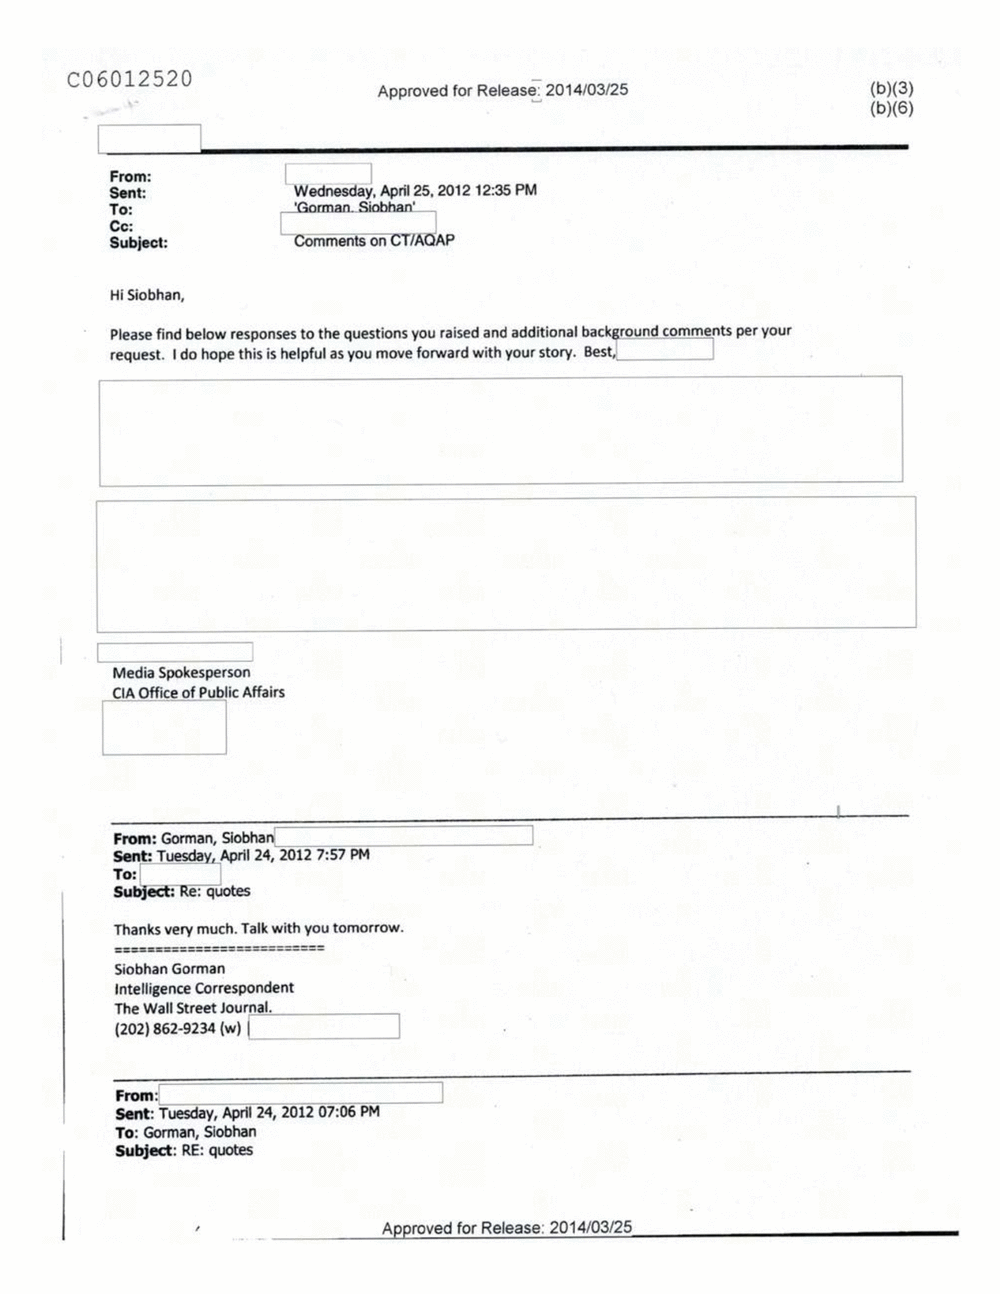 Page 40 from Email Correspondence Between Reporters and CIA Flacks